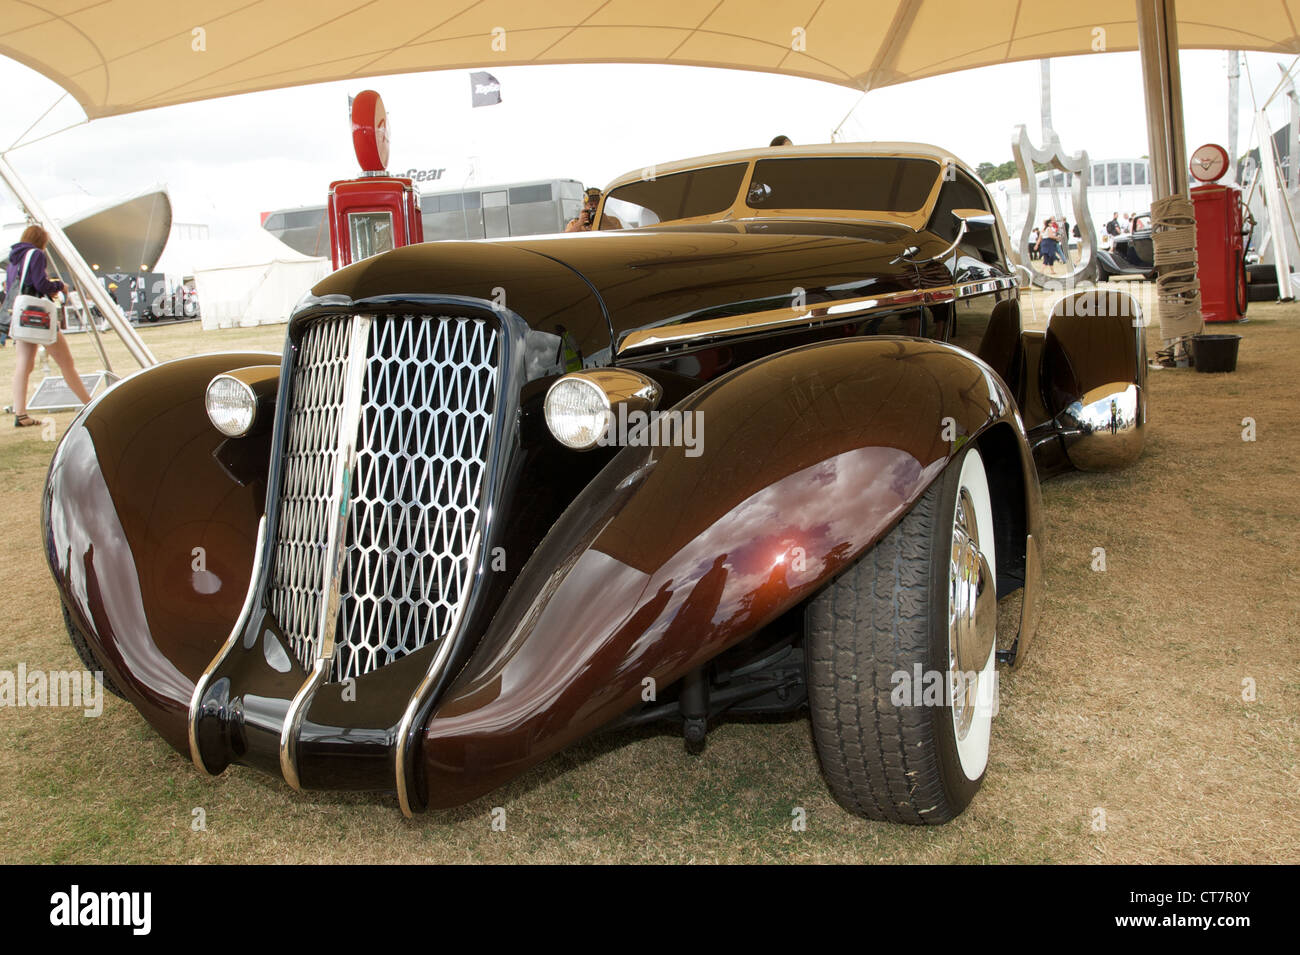 1936 Auburn Boat Tail Speedster owned by front-man of rock band Metalica, James Hetfield. Stock Photo